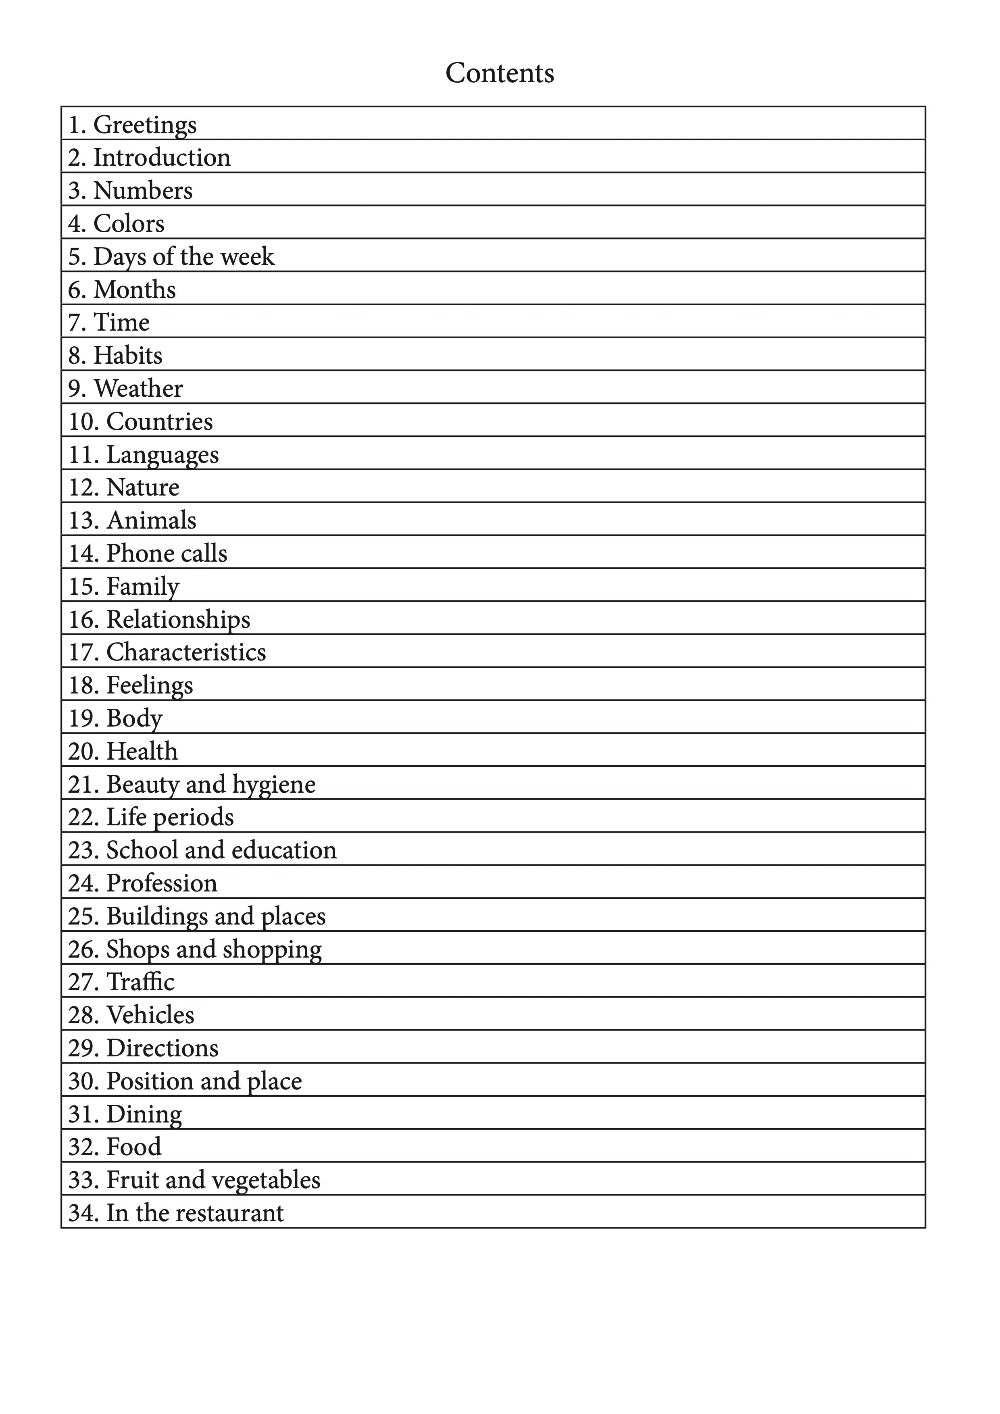 Pohnpeian language learning notebook contents page 1